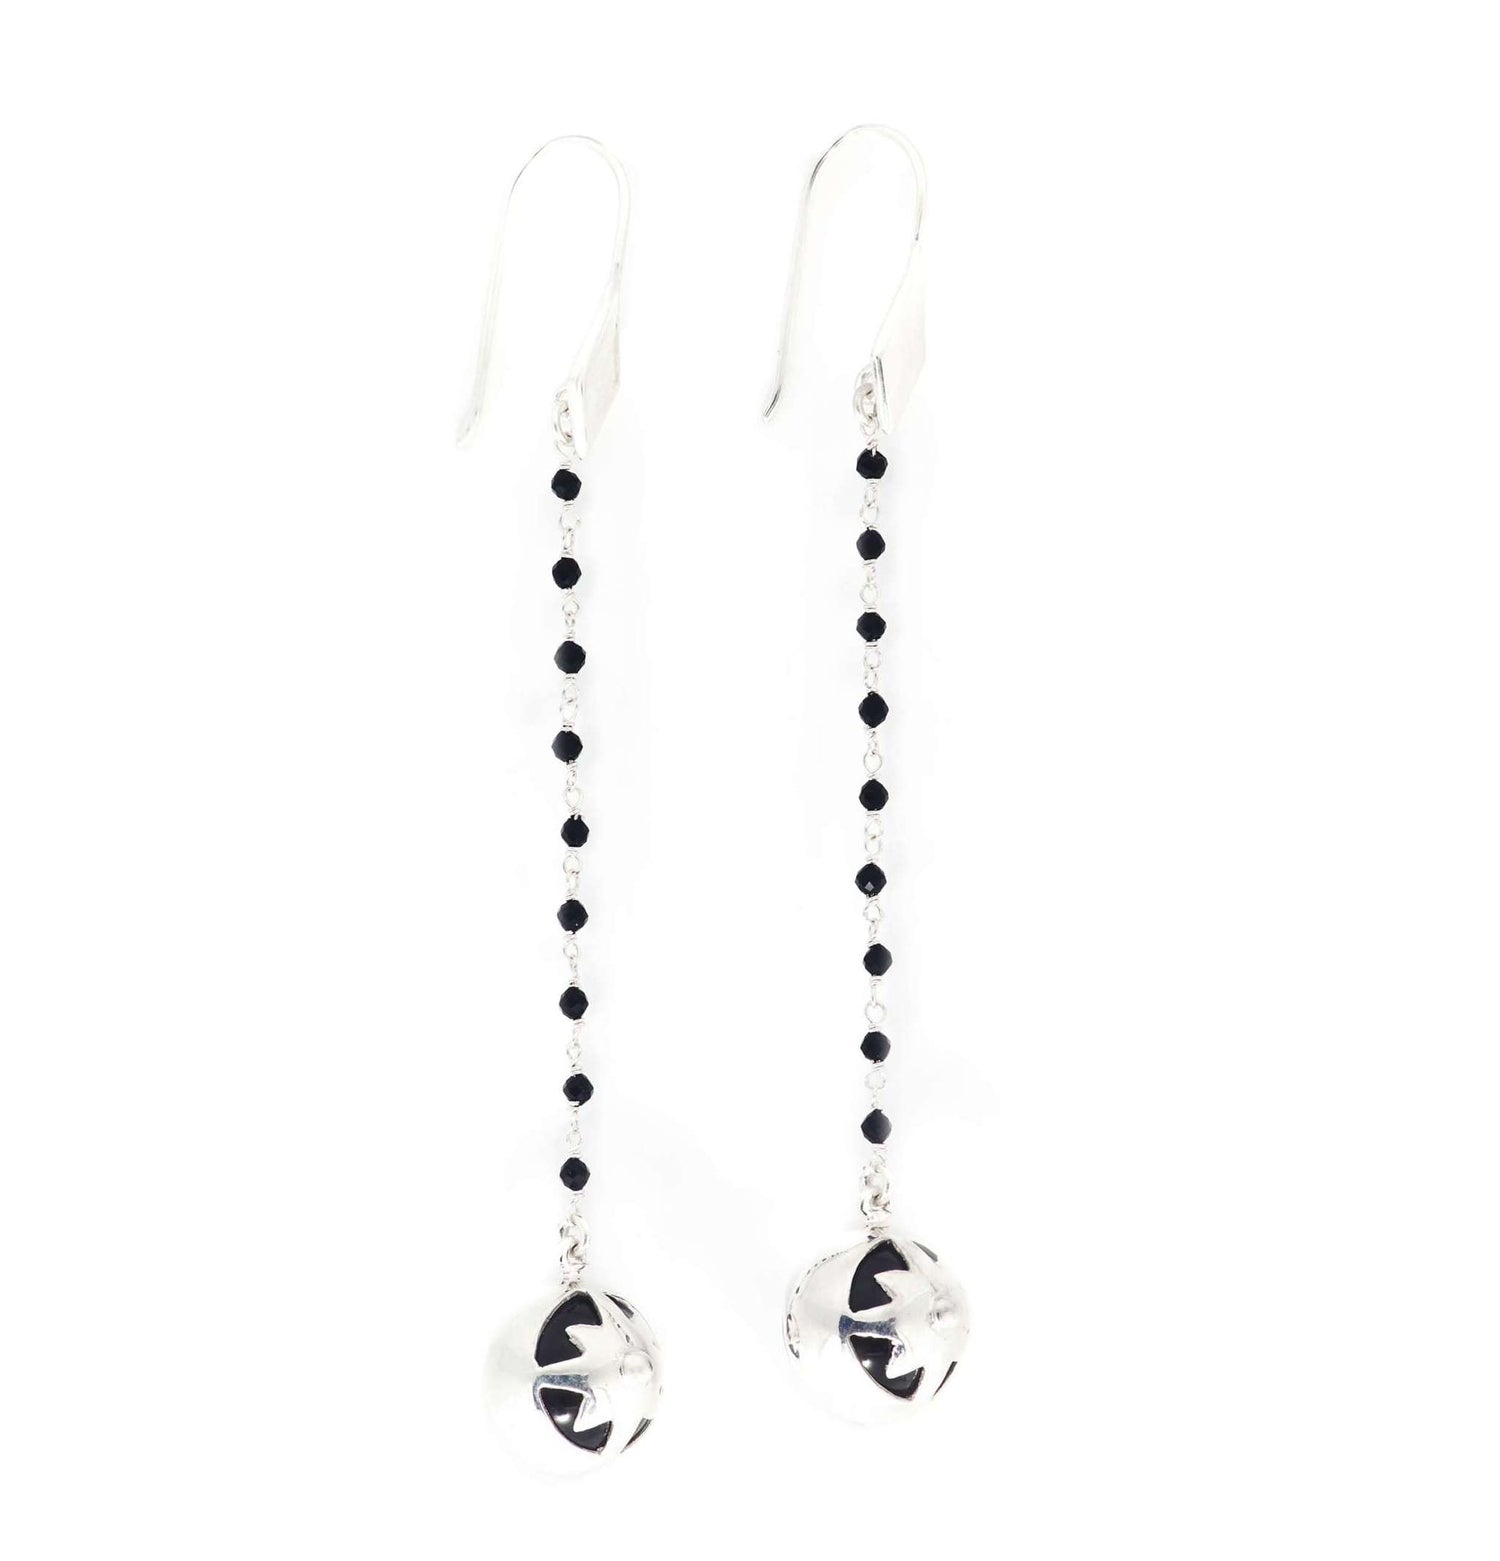 Magical Earhooks for a Timeless Night - Add Sparkle to Your Evening